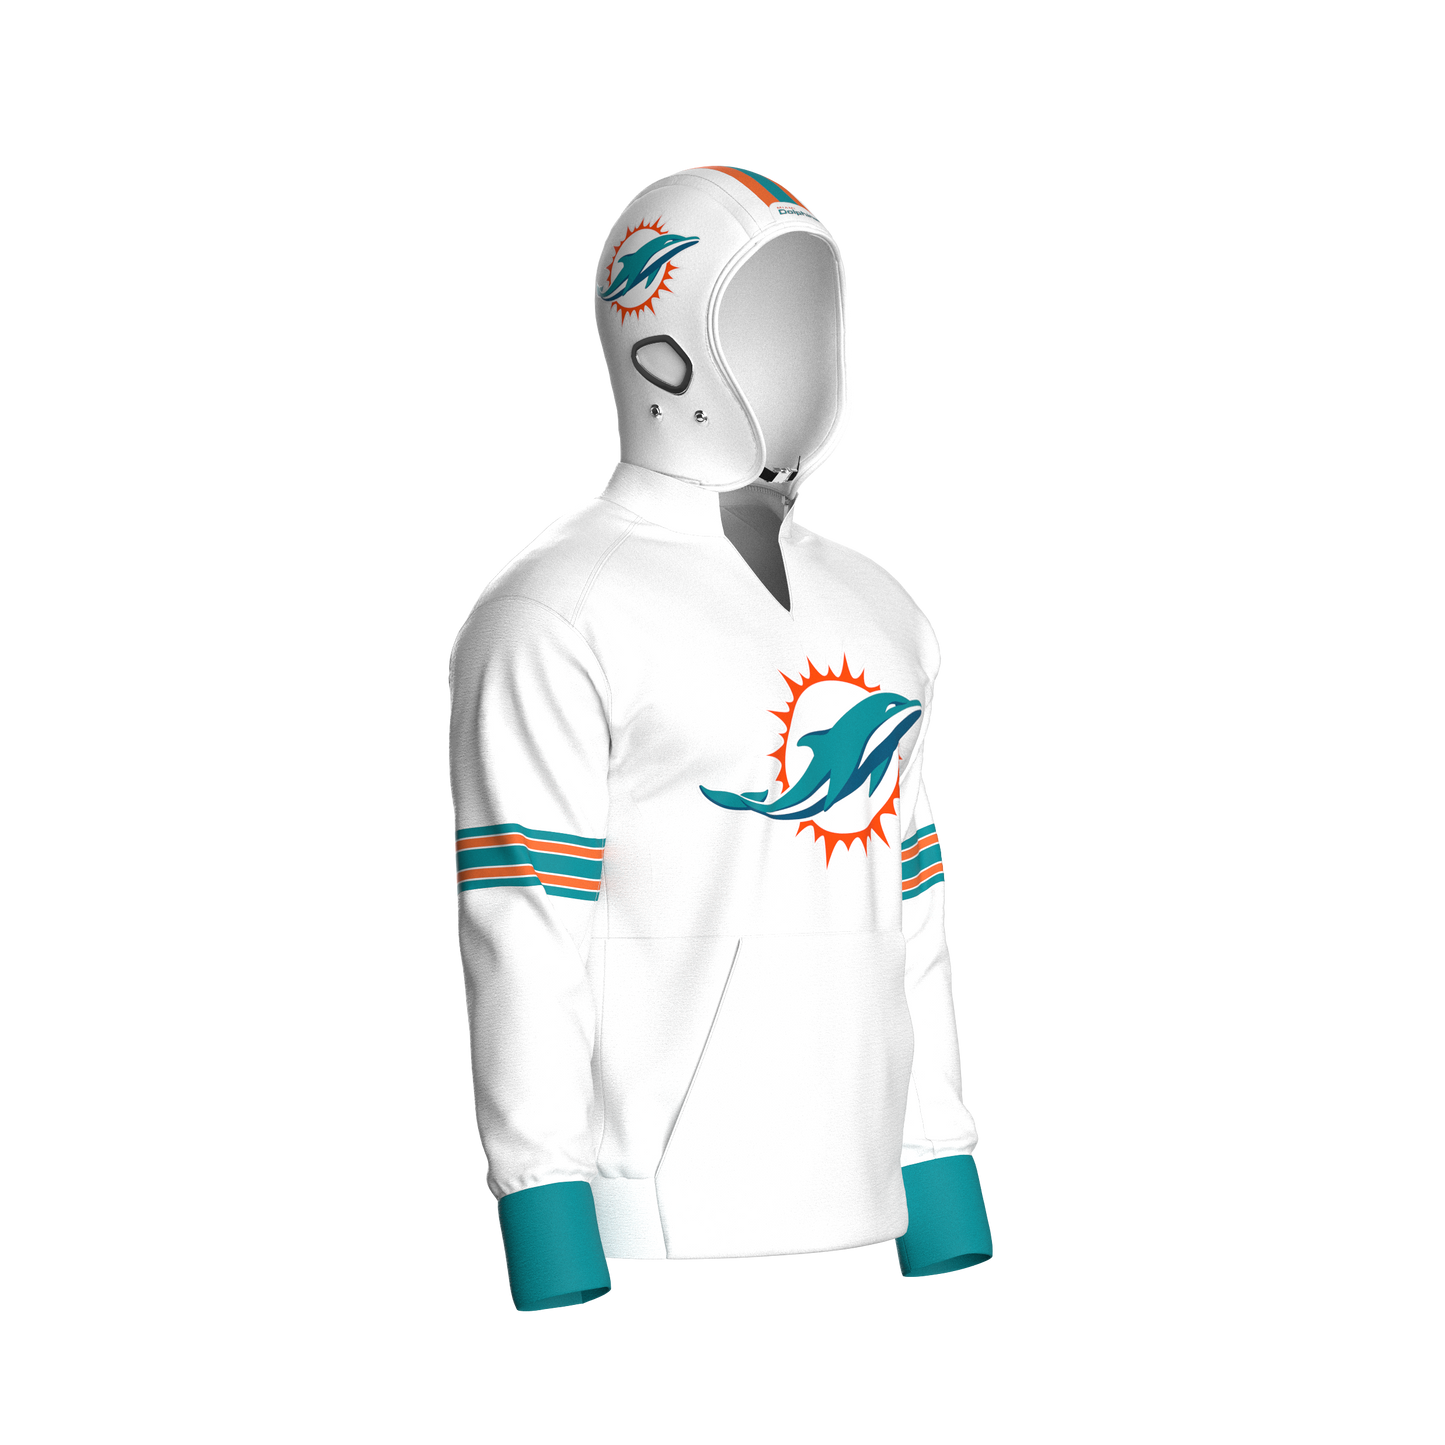 Miami Dolphins Away Pullover (adult)